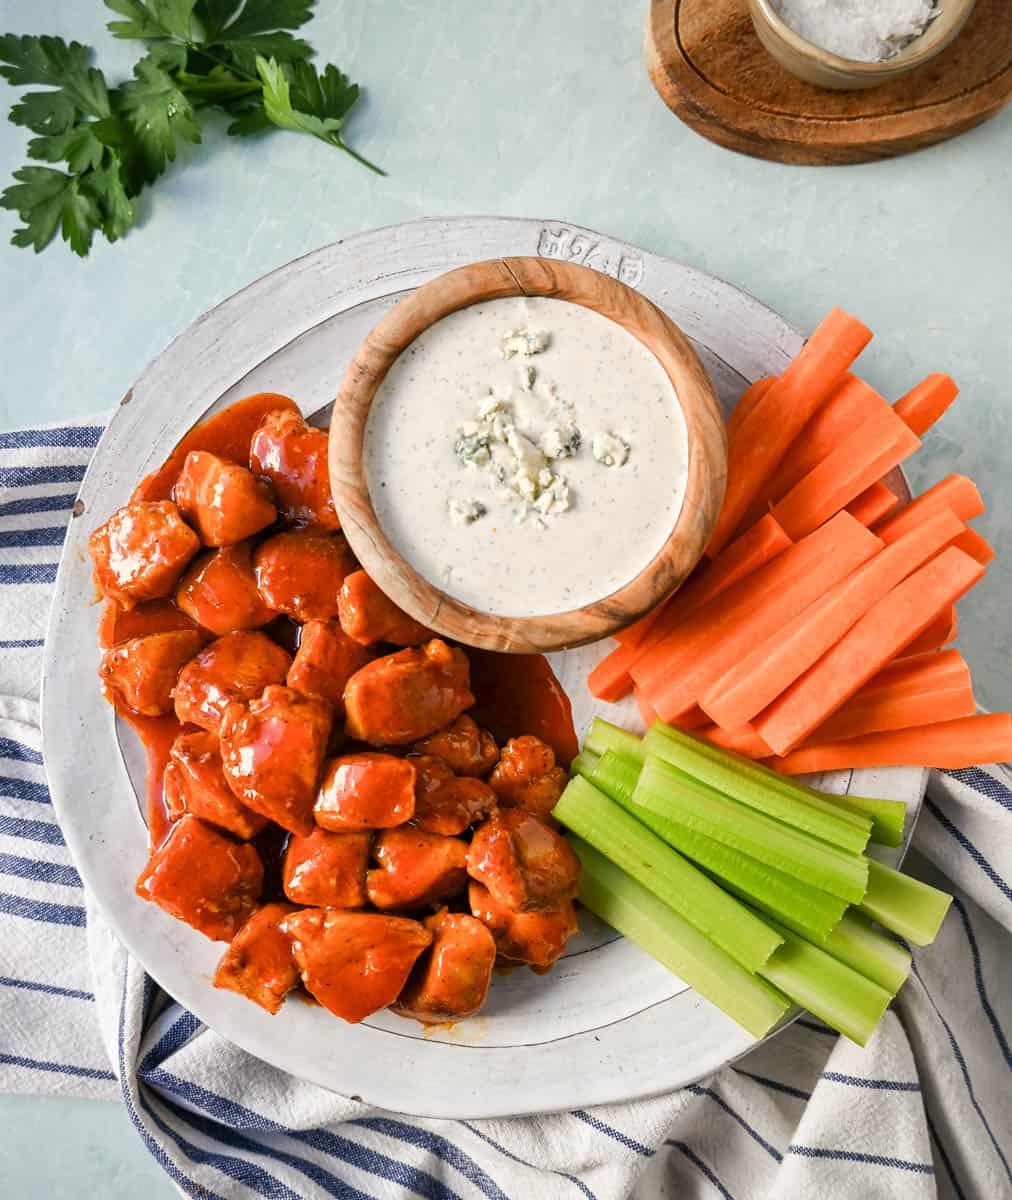 Buffalo Chicken Bites. f you love the flavor of buffalo chicken wings but want a lighter, healthier version, you will love these easy buffalo chicken bites without the breading and no frying.